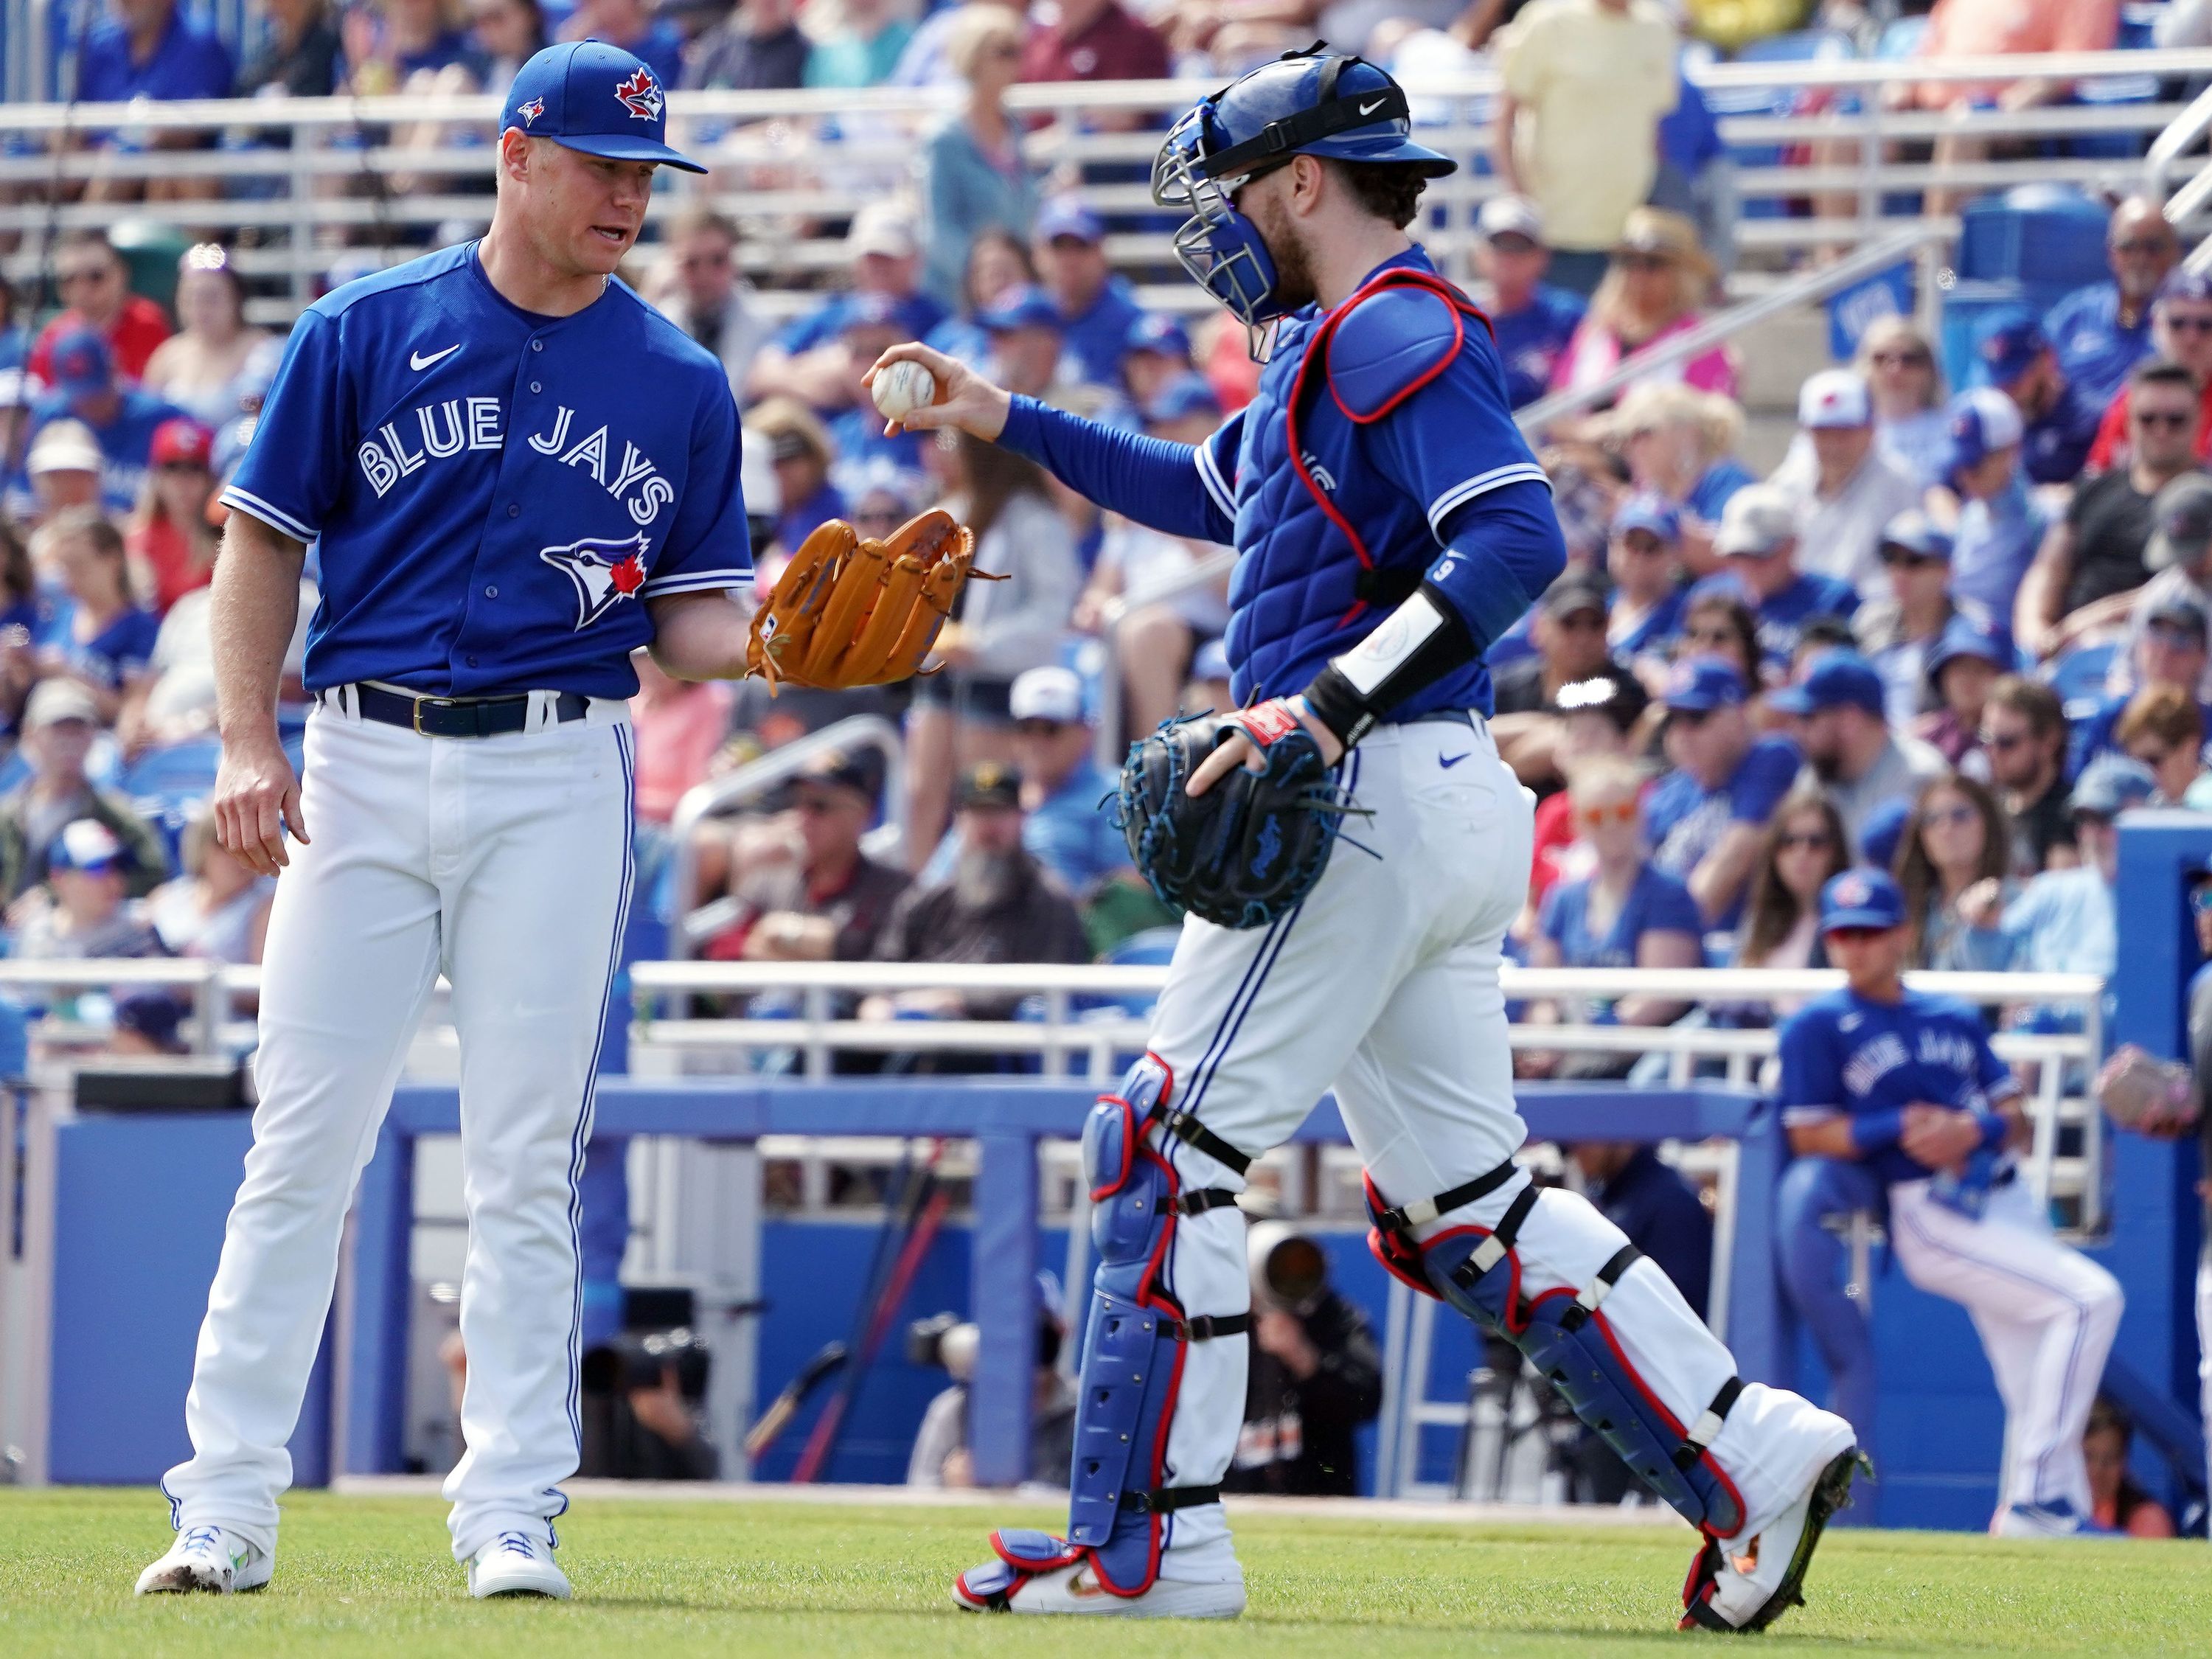 Welcome to TD Ballpark: The Spring Training Home of the Toronto Blue Jays